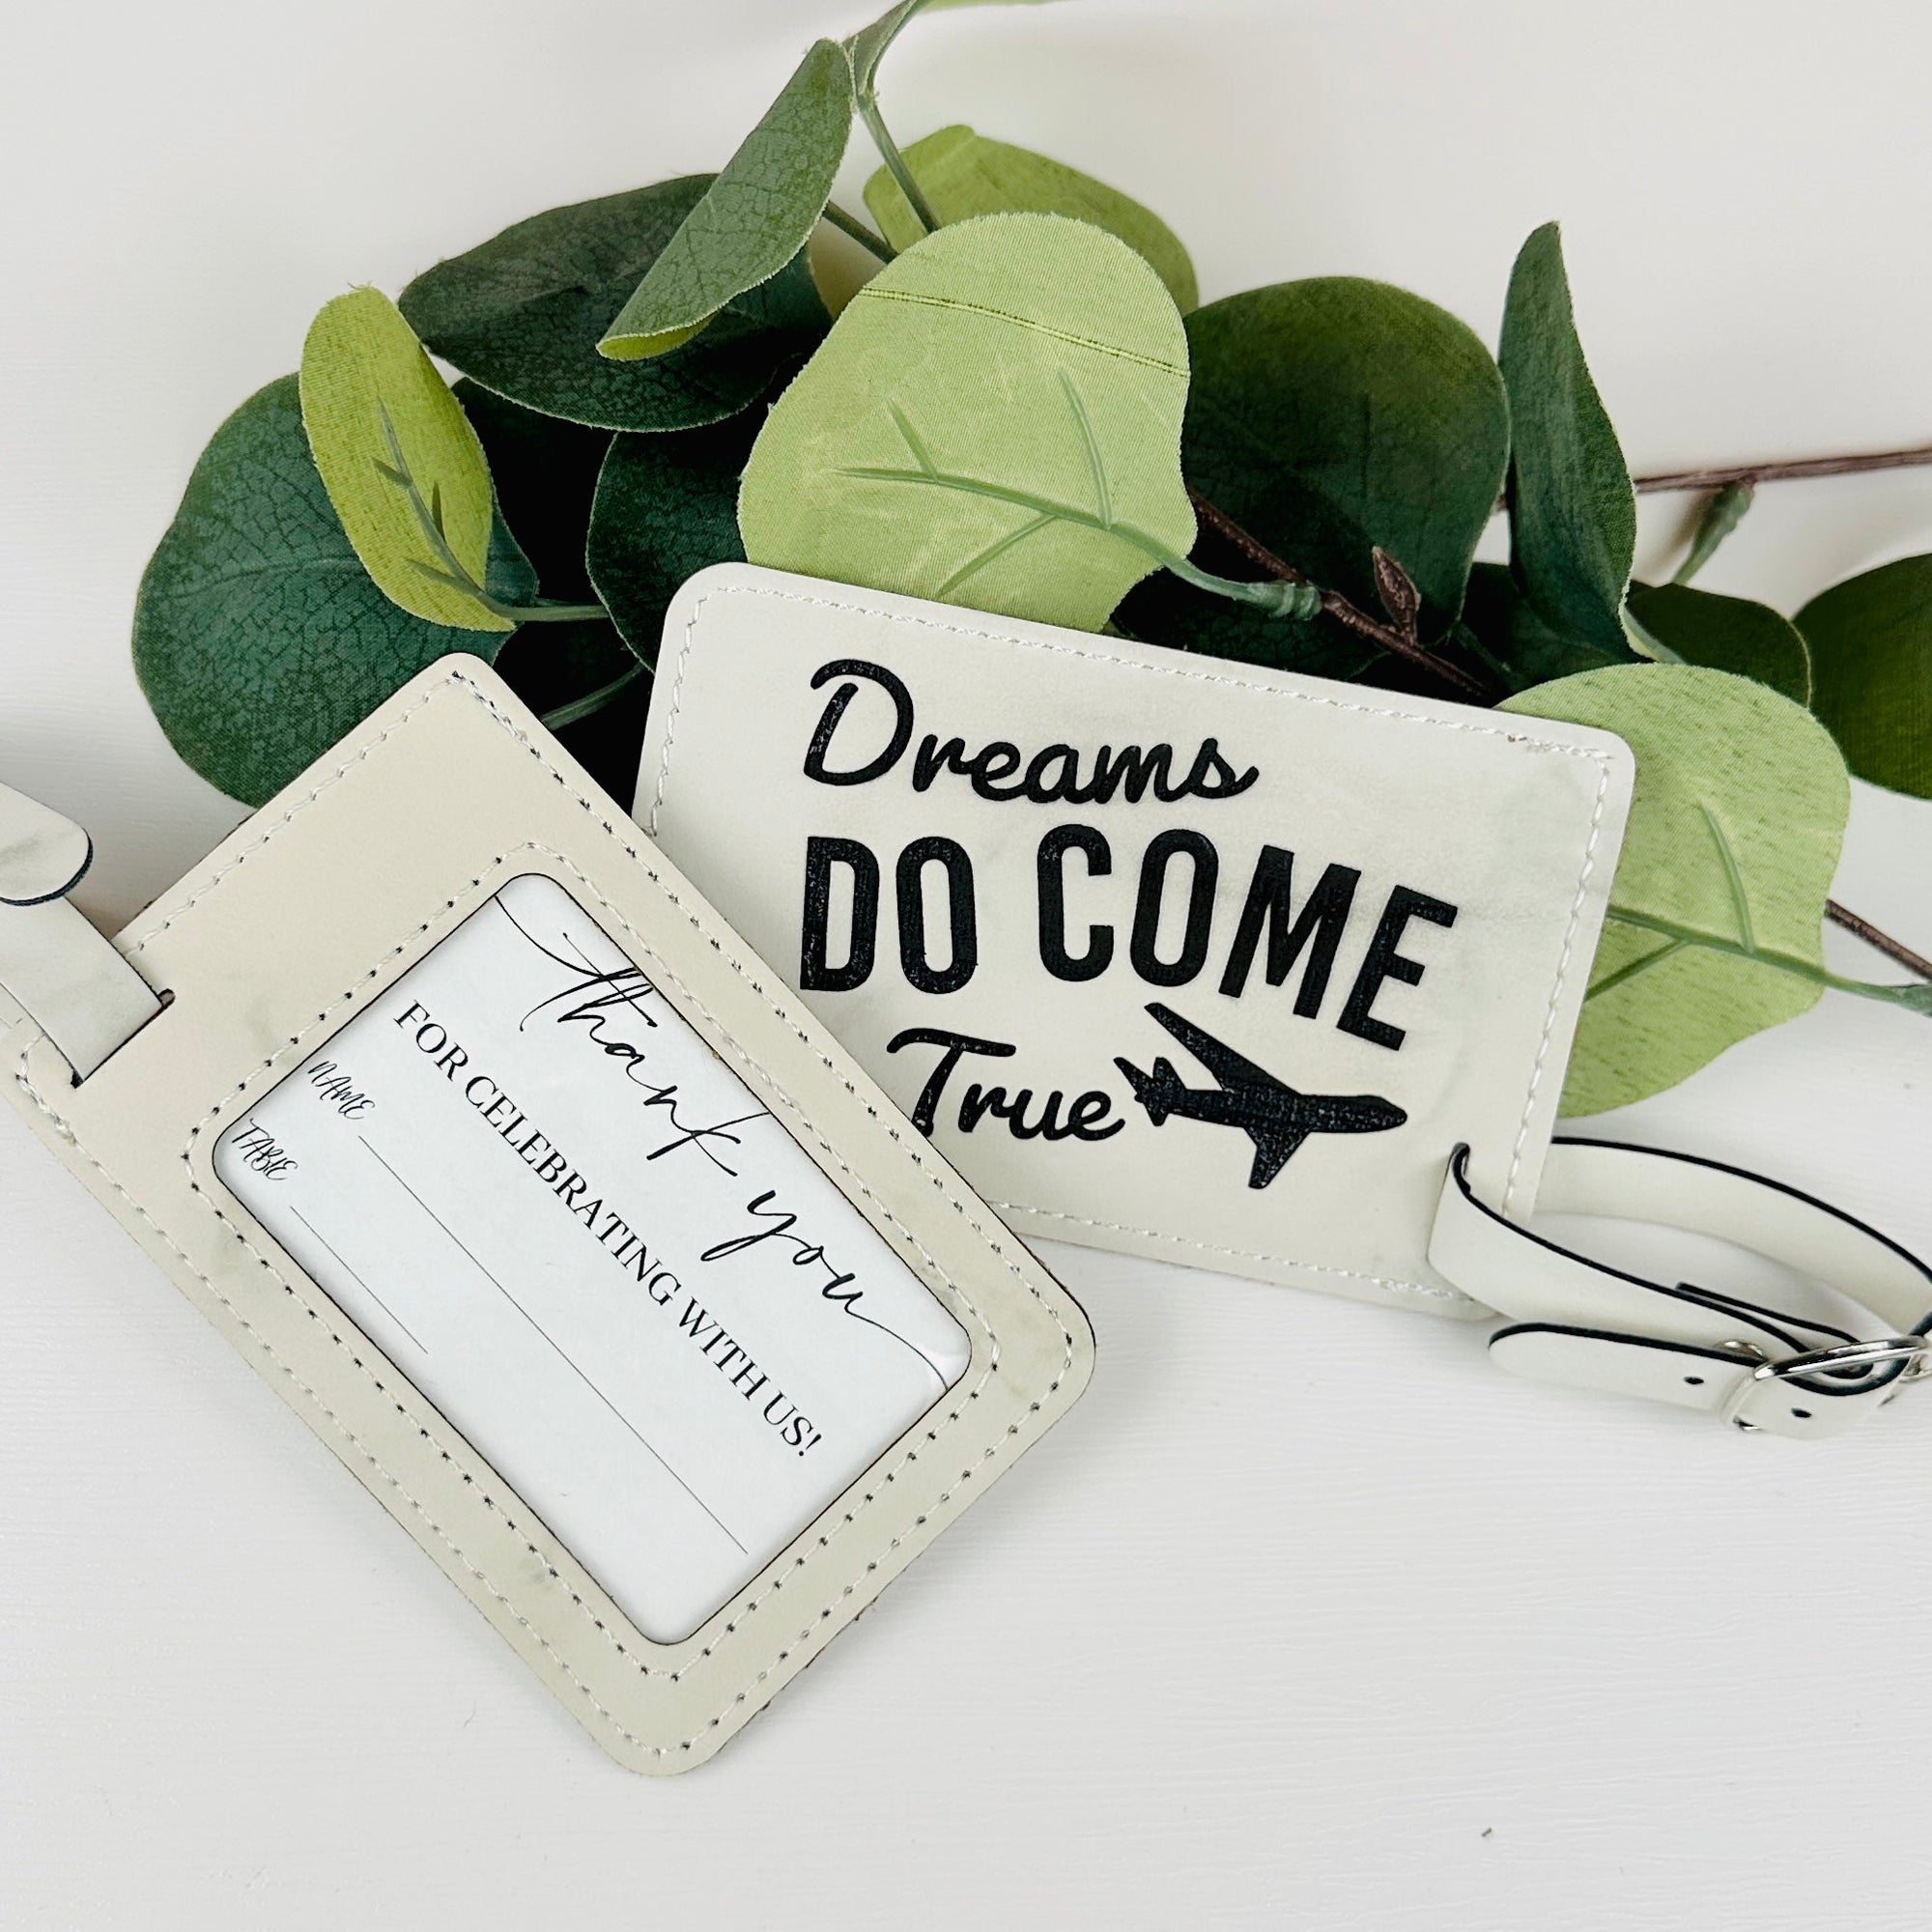 Dreams Do Come True Luggage Tag - Forever Wedding Favors